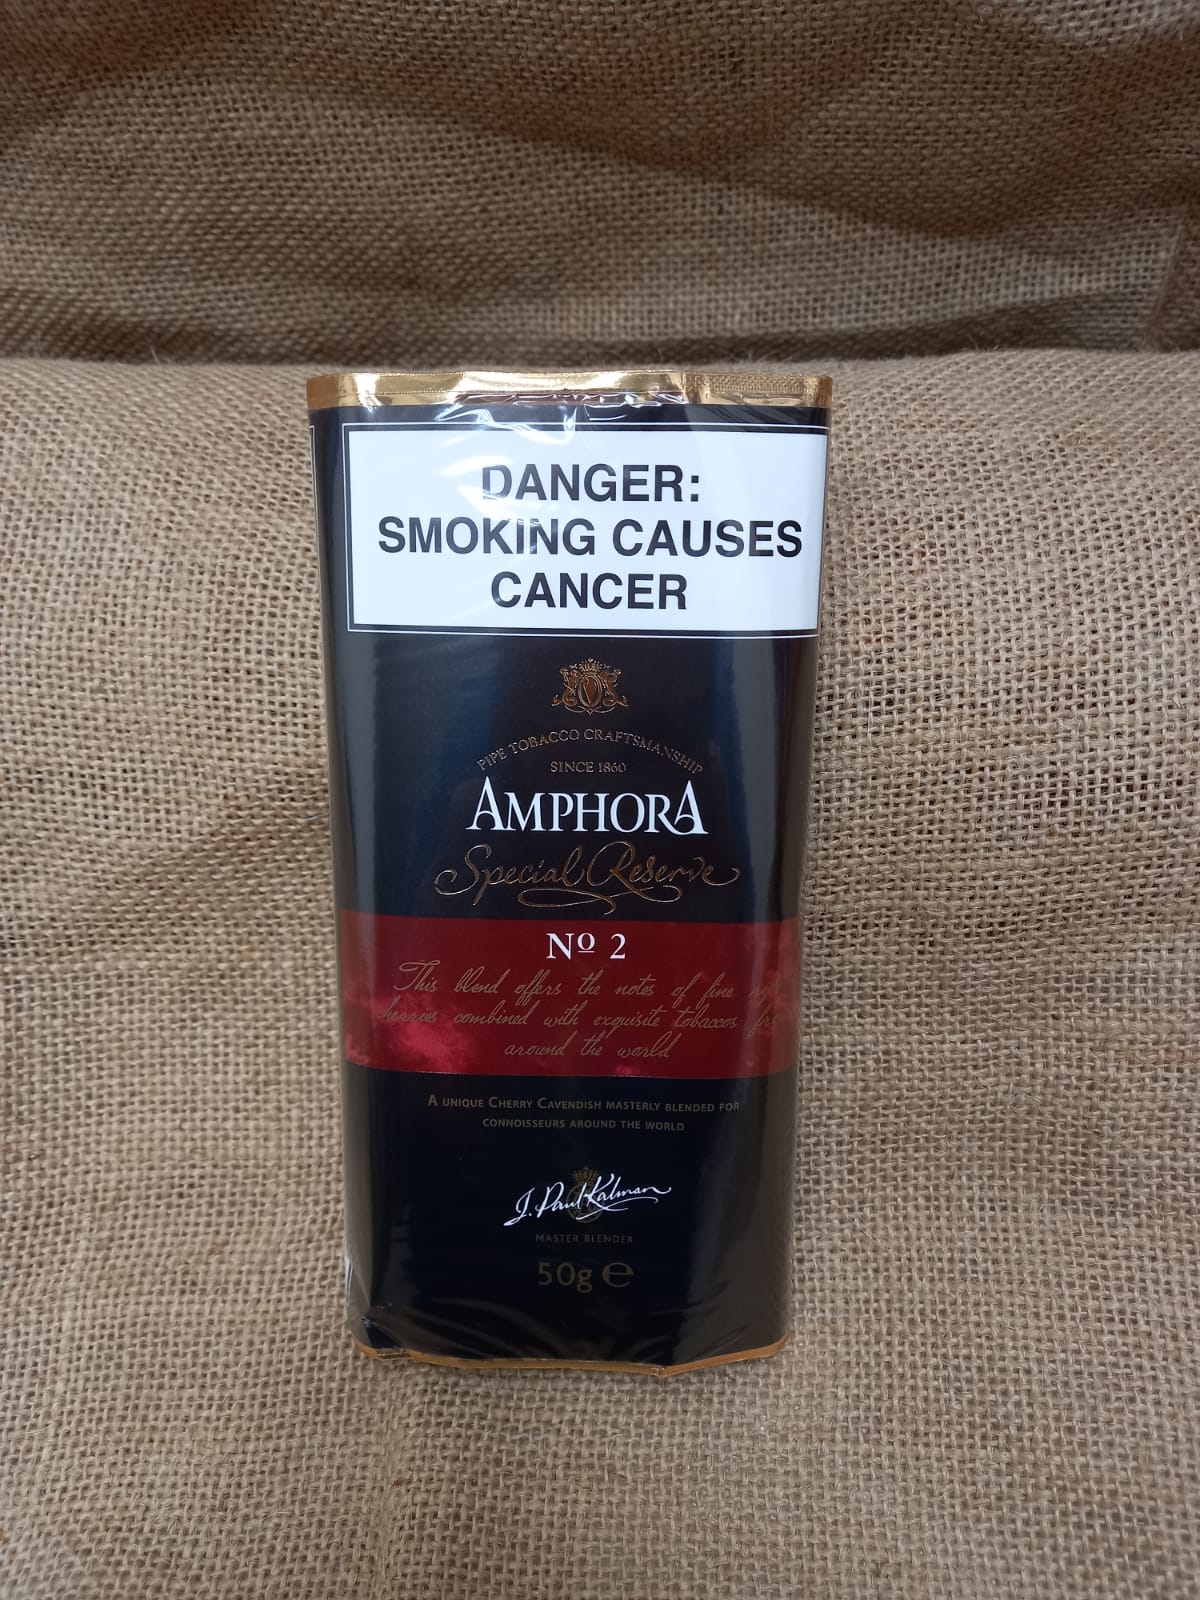 PIPE TOBACCO PER PACKET